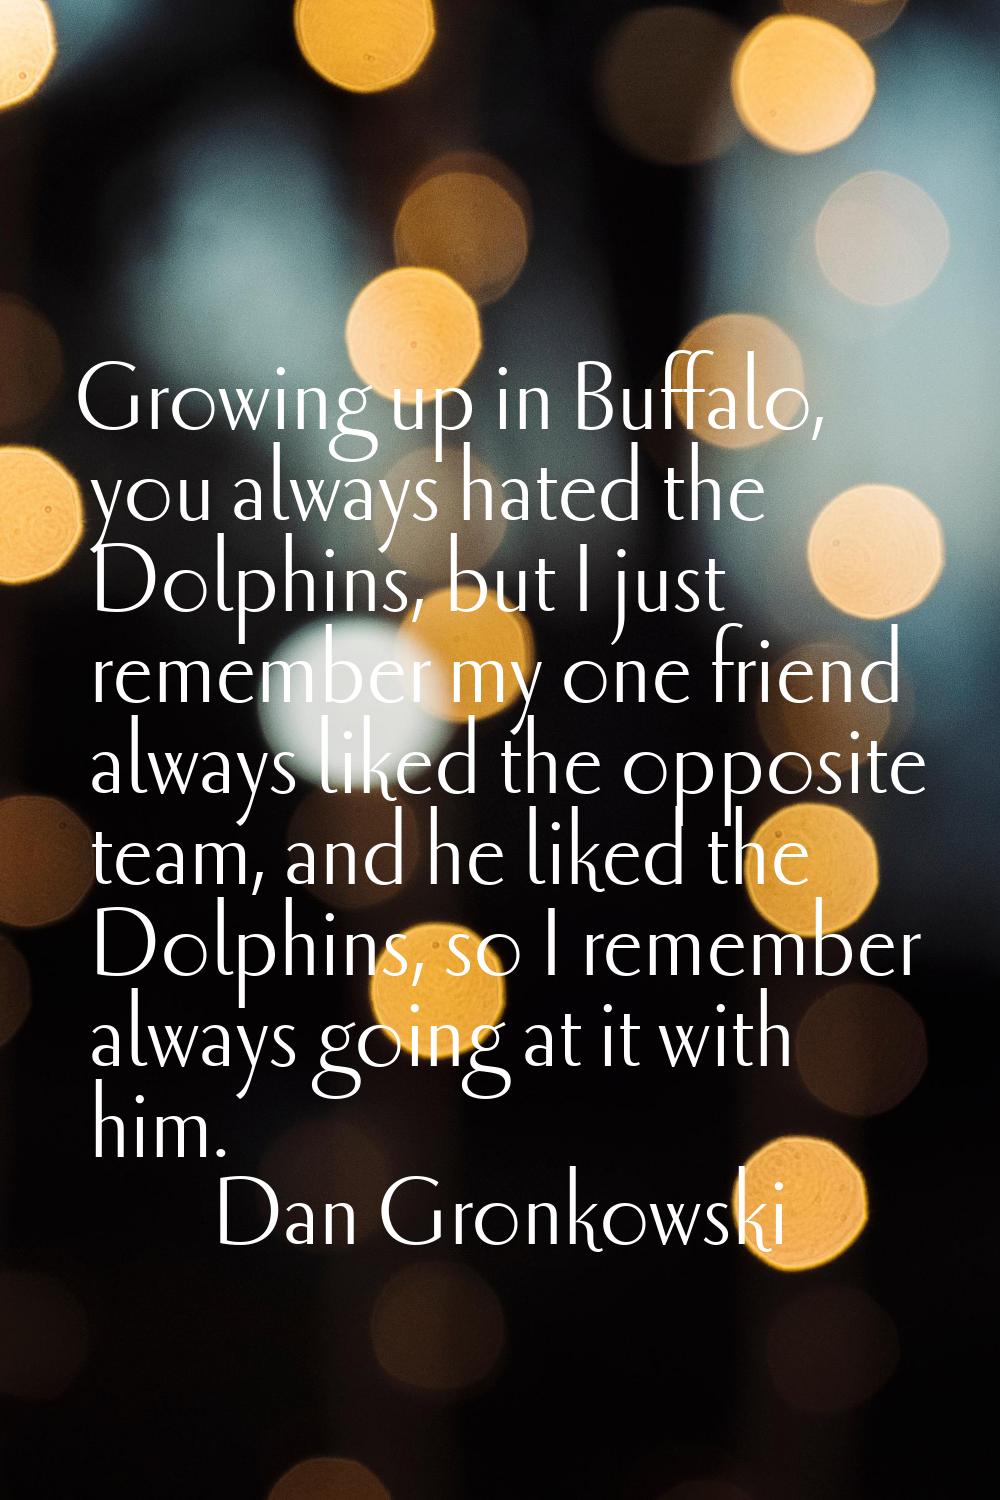 Growing up in Buffalo, you always hated the Dolphins, but I just remember my one friend always like